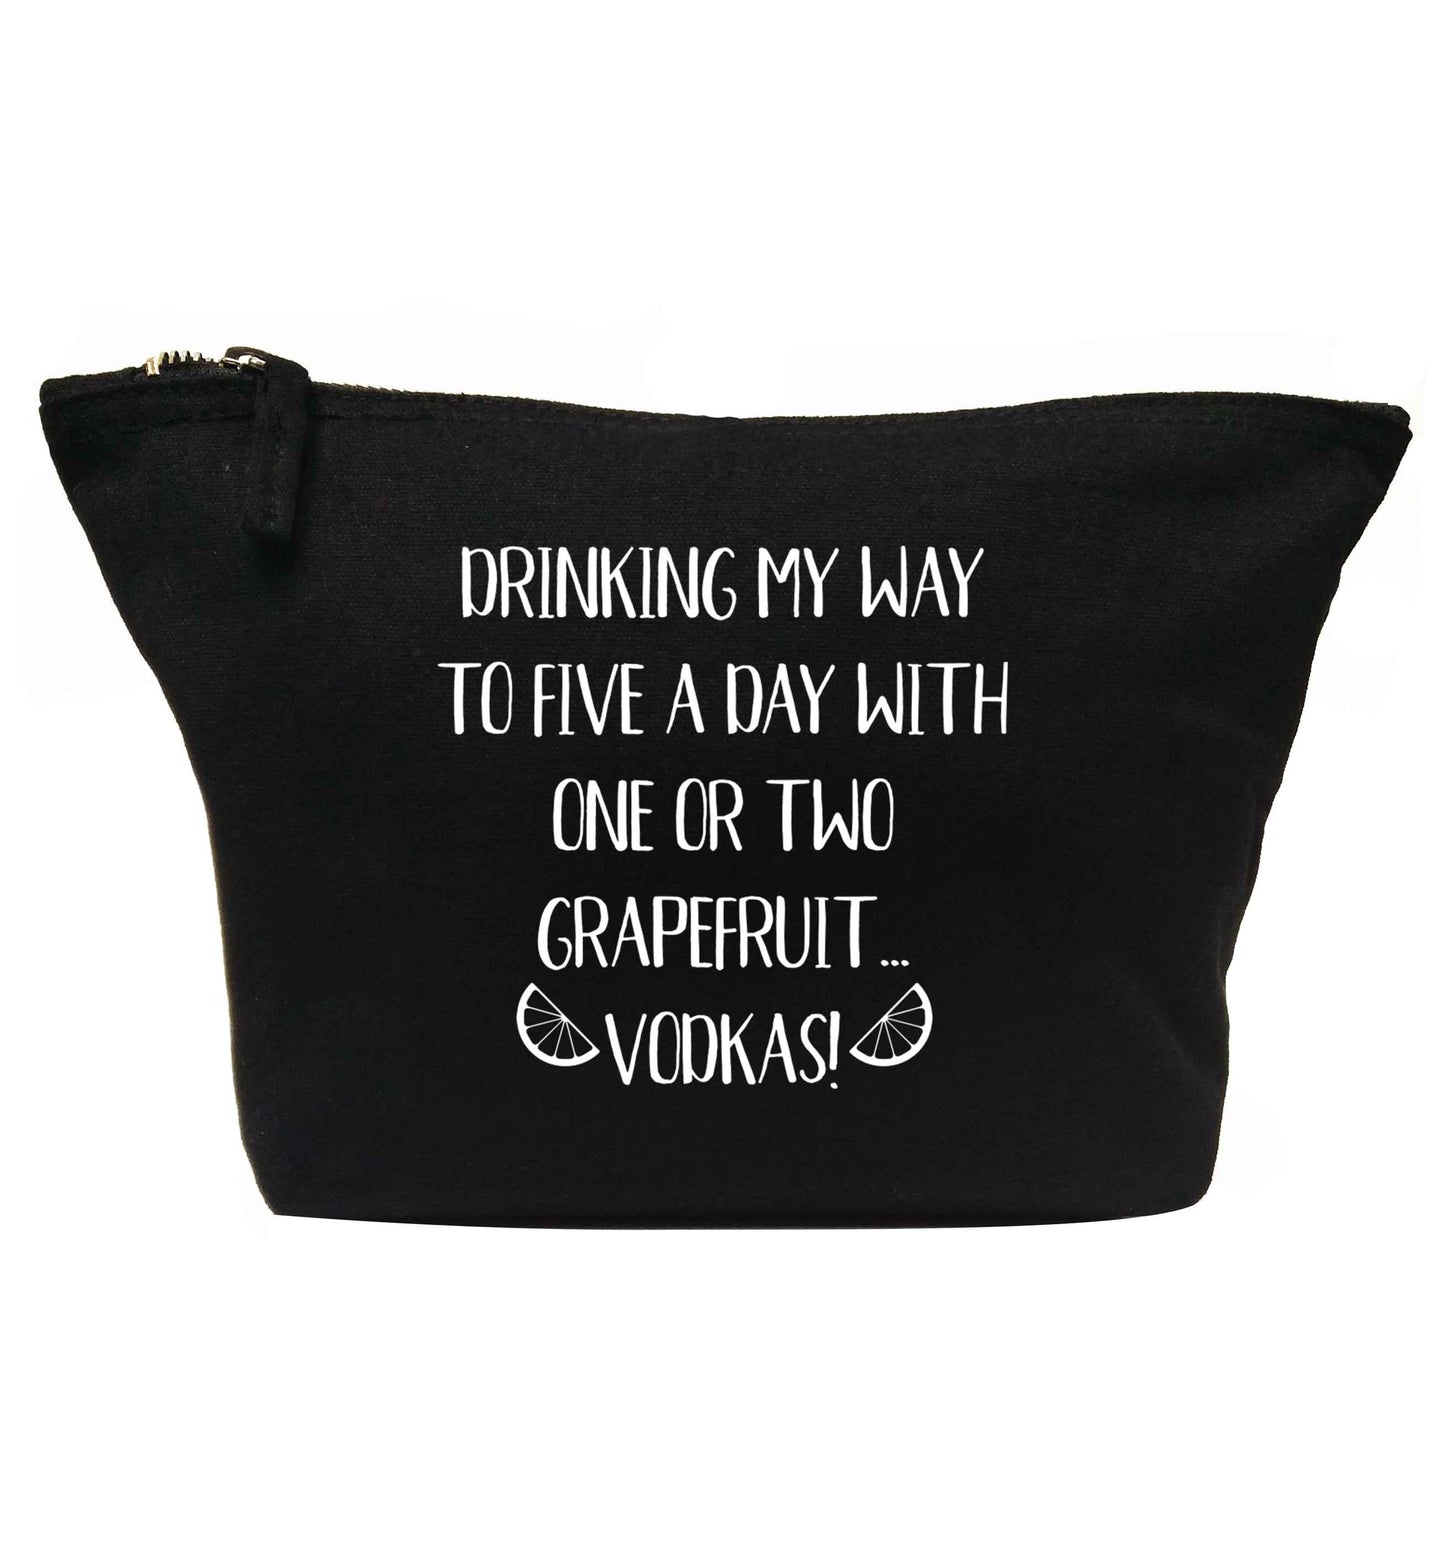 Drinking my way to five a day with one or two grapefruit vodkas | makeup / wash bag